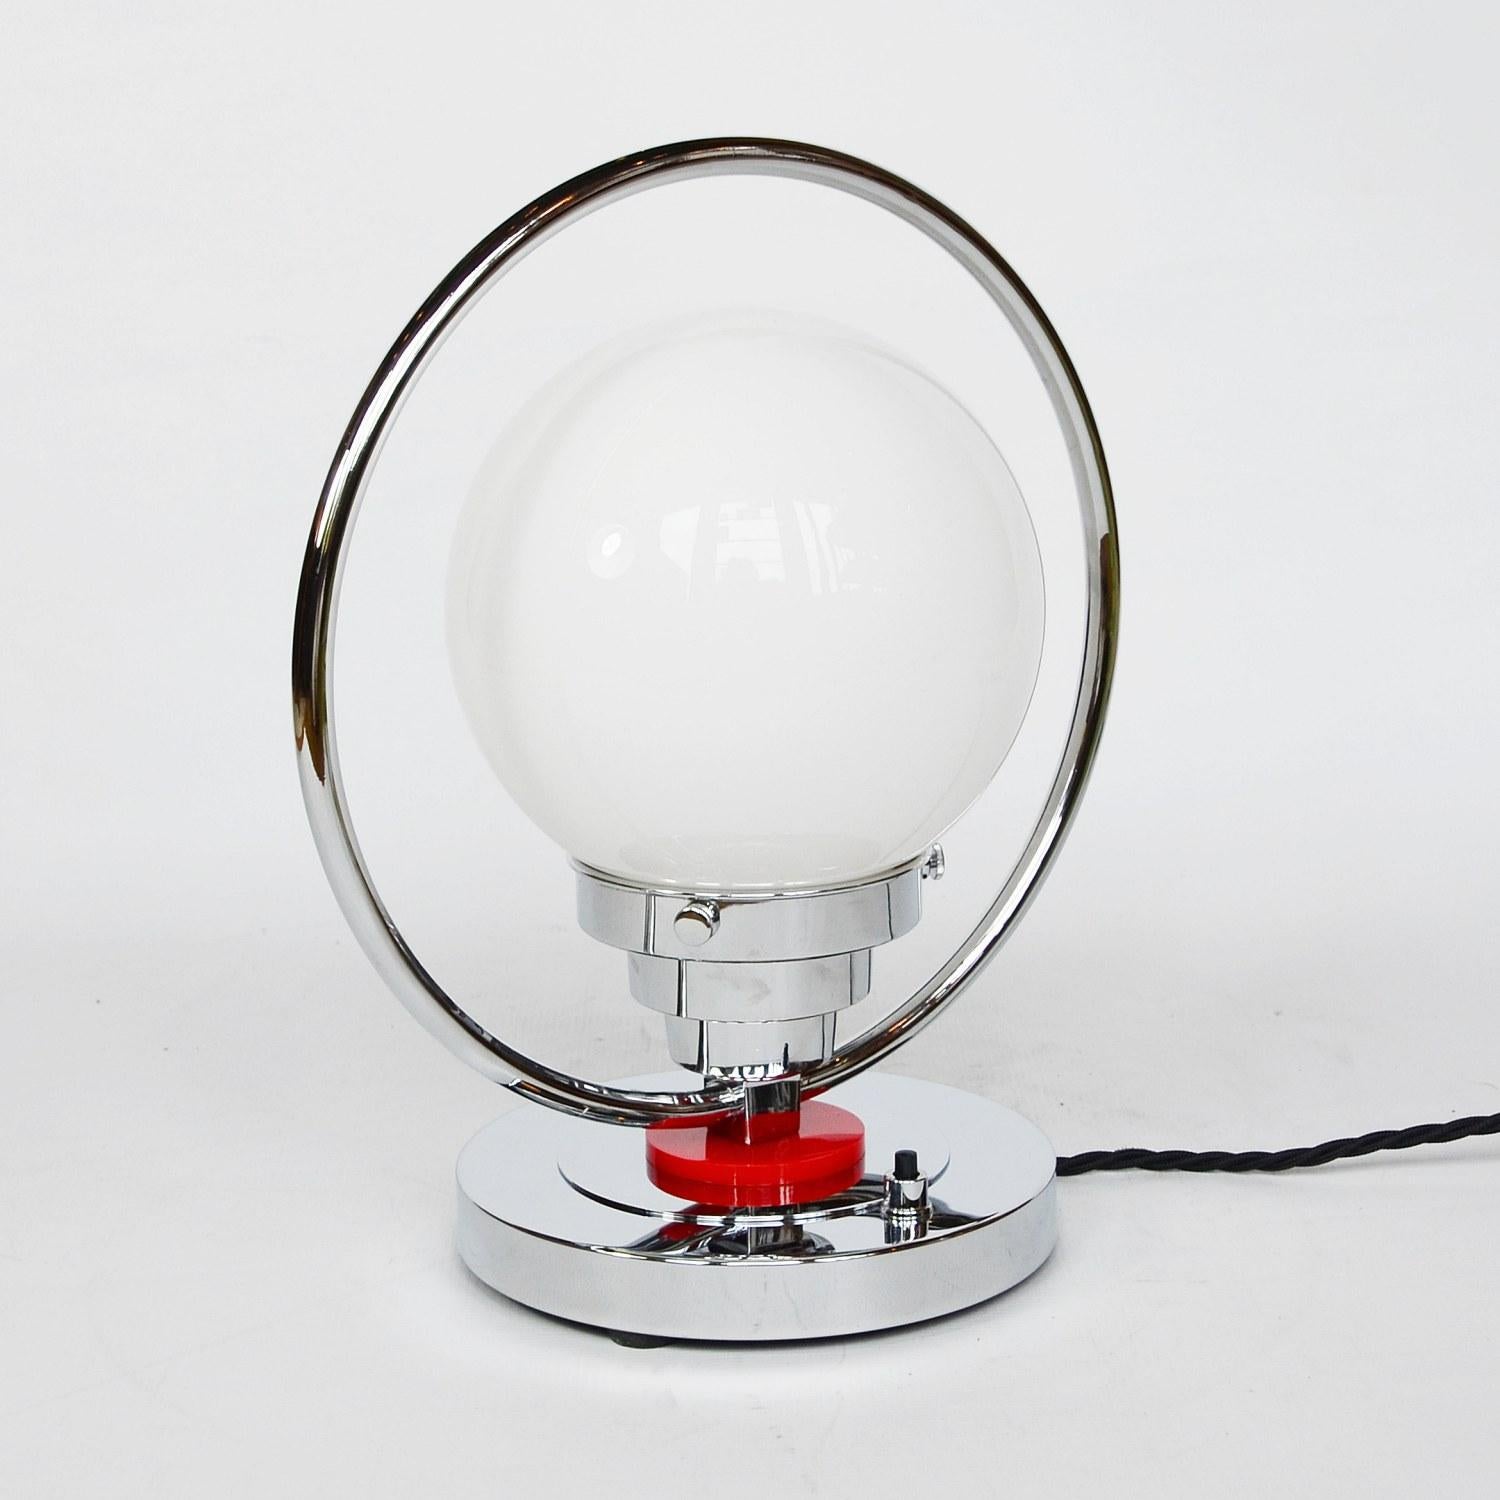 An Art Deco table lamp. Chromed metal base with red Catalin disc and mounted chromed hoop enclosing white glass shade.

Dimensions: H 20cm, W of shade 25cm, W of base 15cm

Origin: English

Item No: 210202

All of our lighting is fully